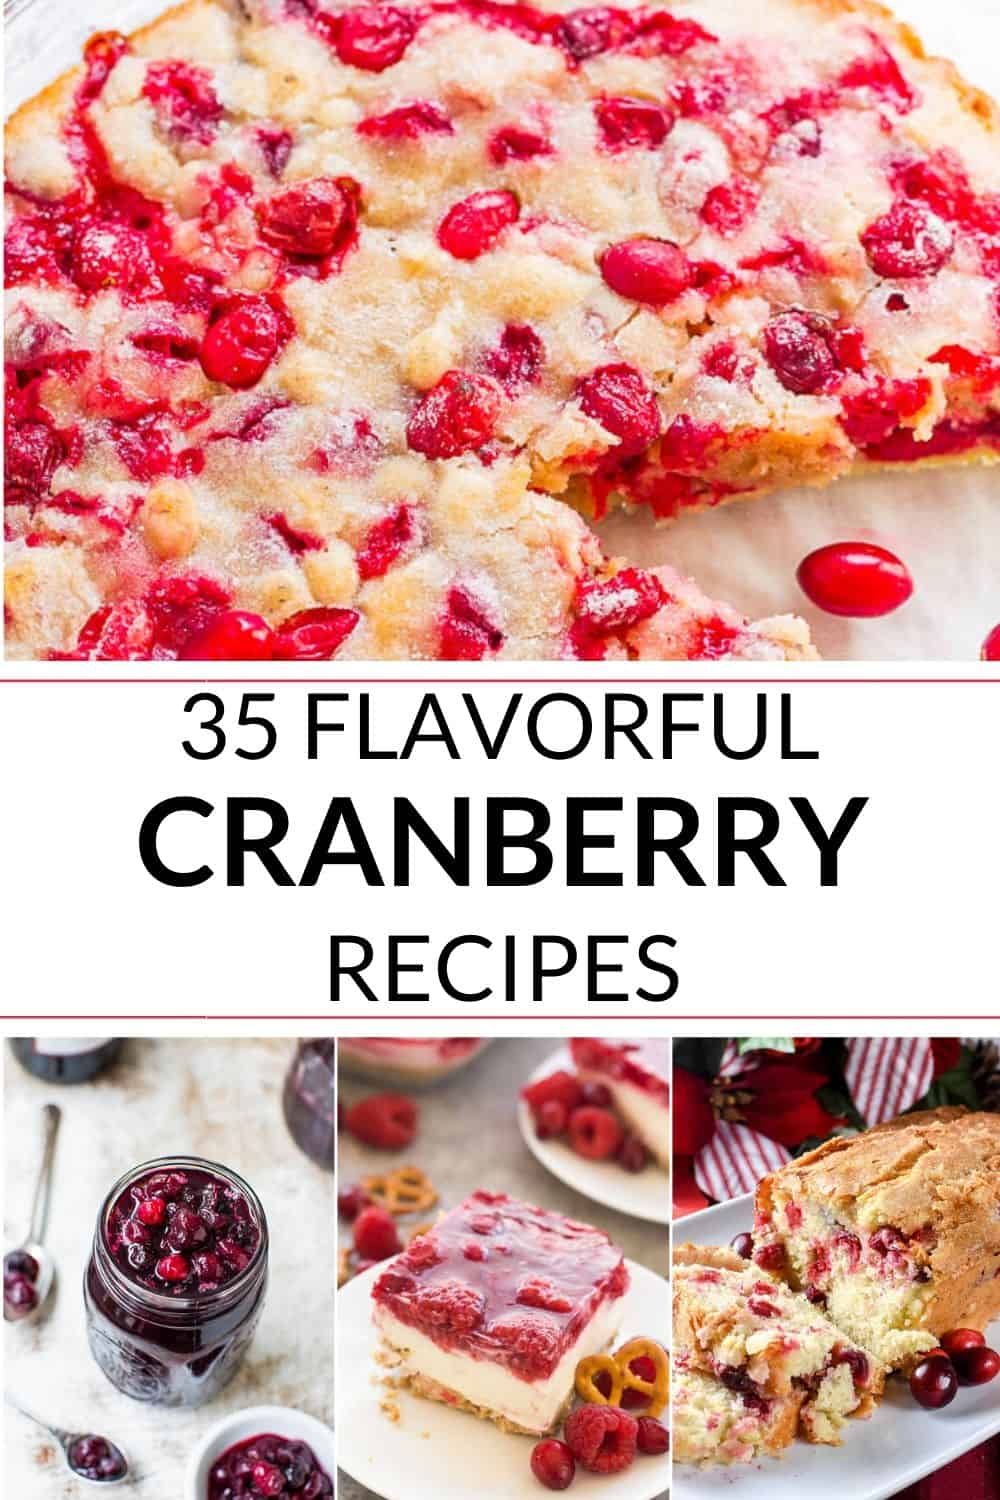 COLLECTION OF CRANBERRY RECIPES